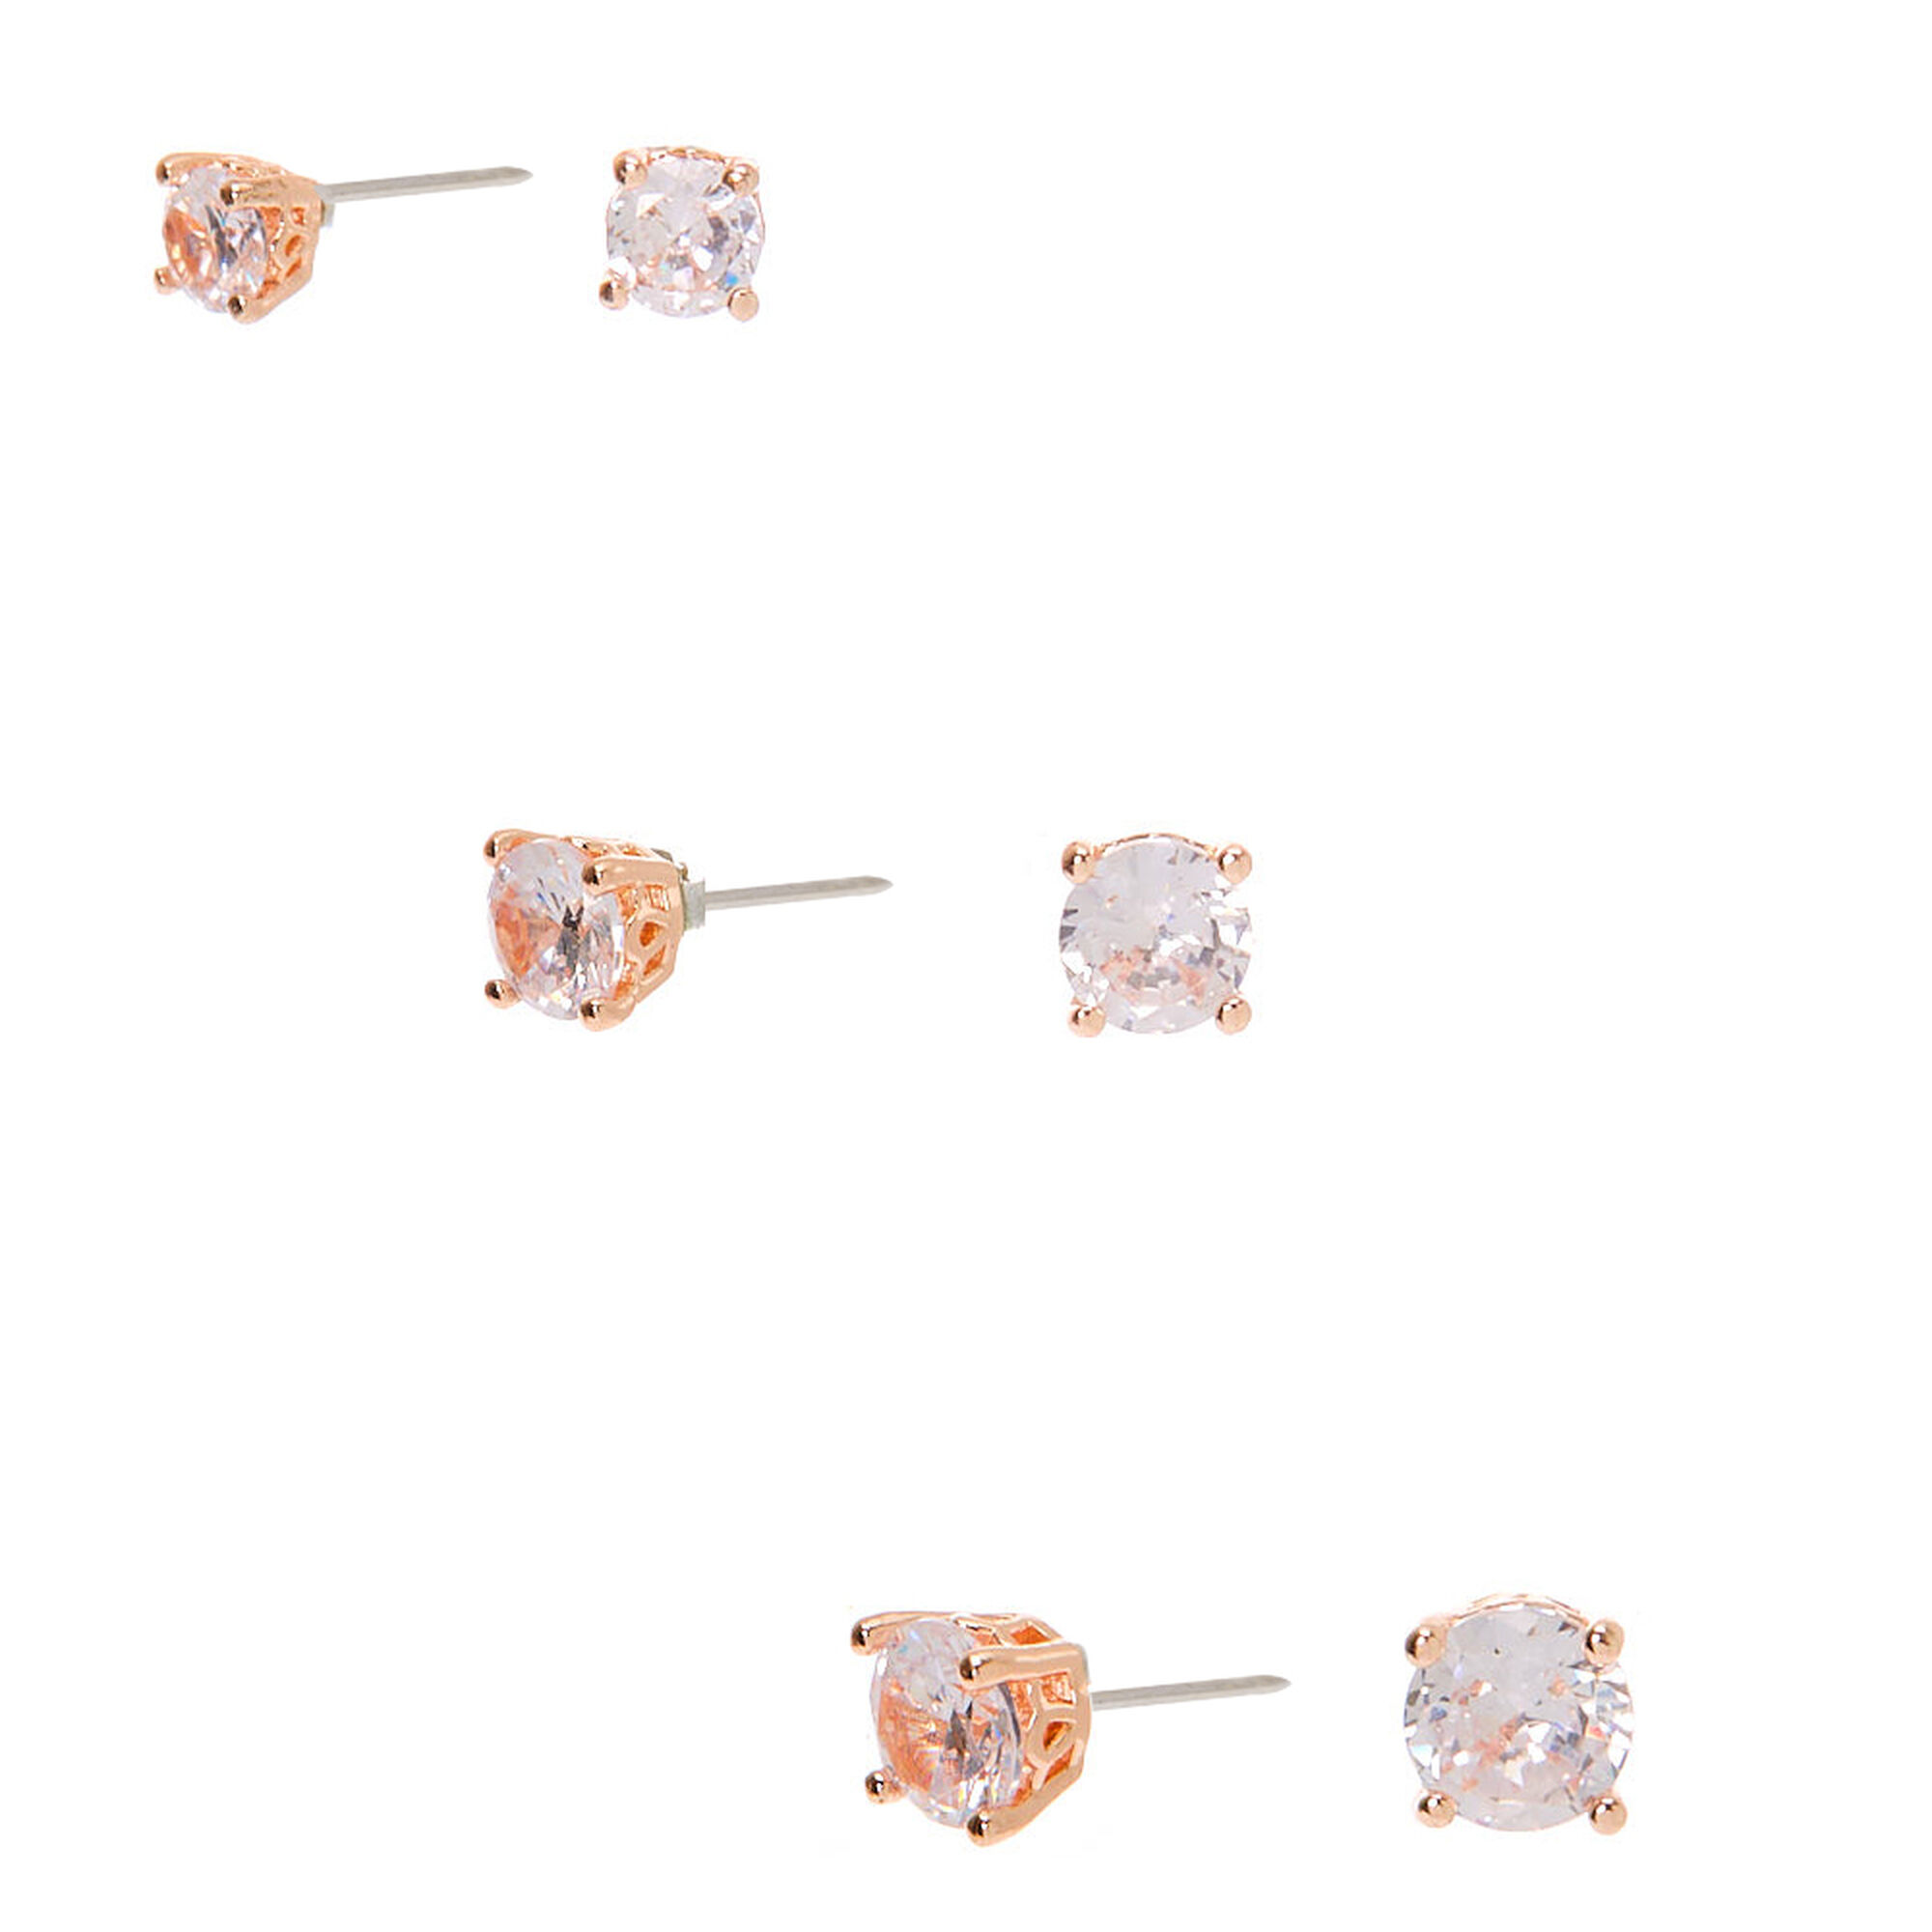 View Claires Tone Cubic Zirconia Graduated Round Stud Earrings 3 Pack Rose Gold information